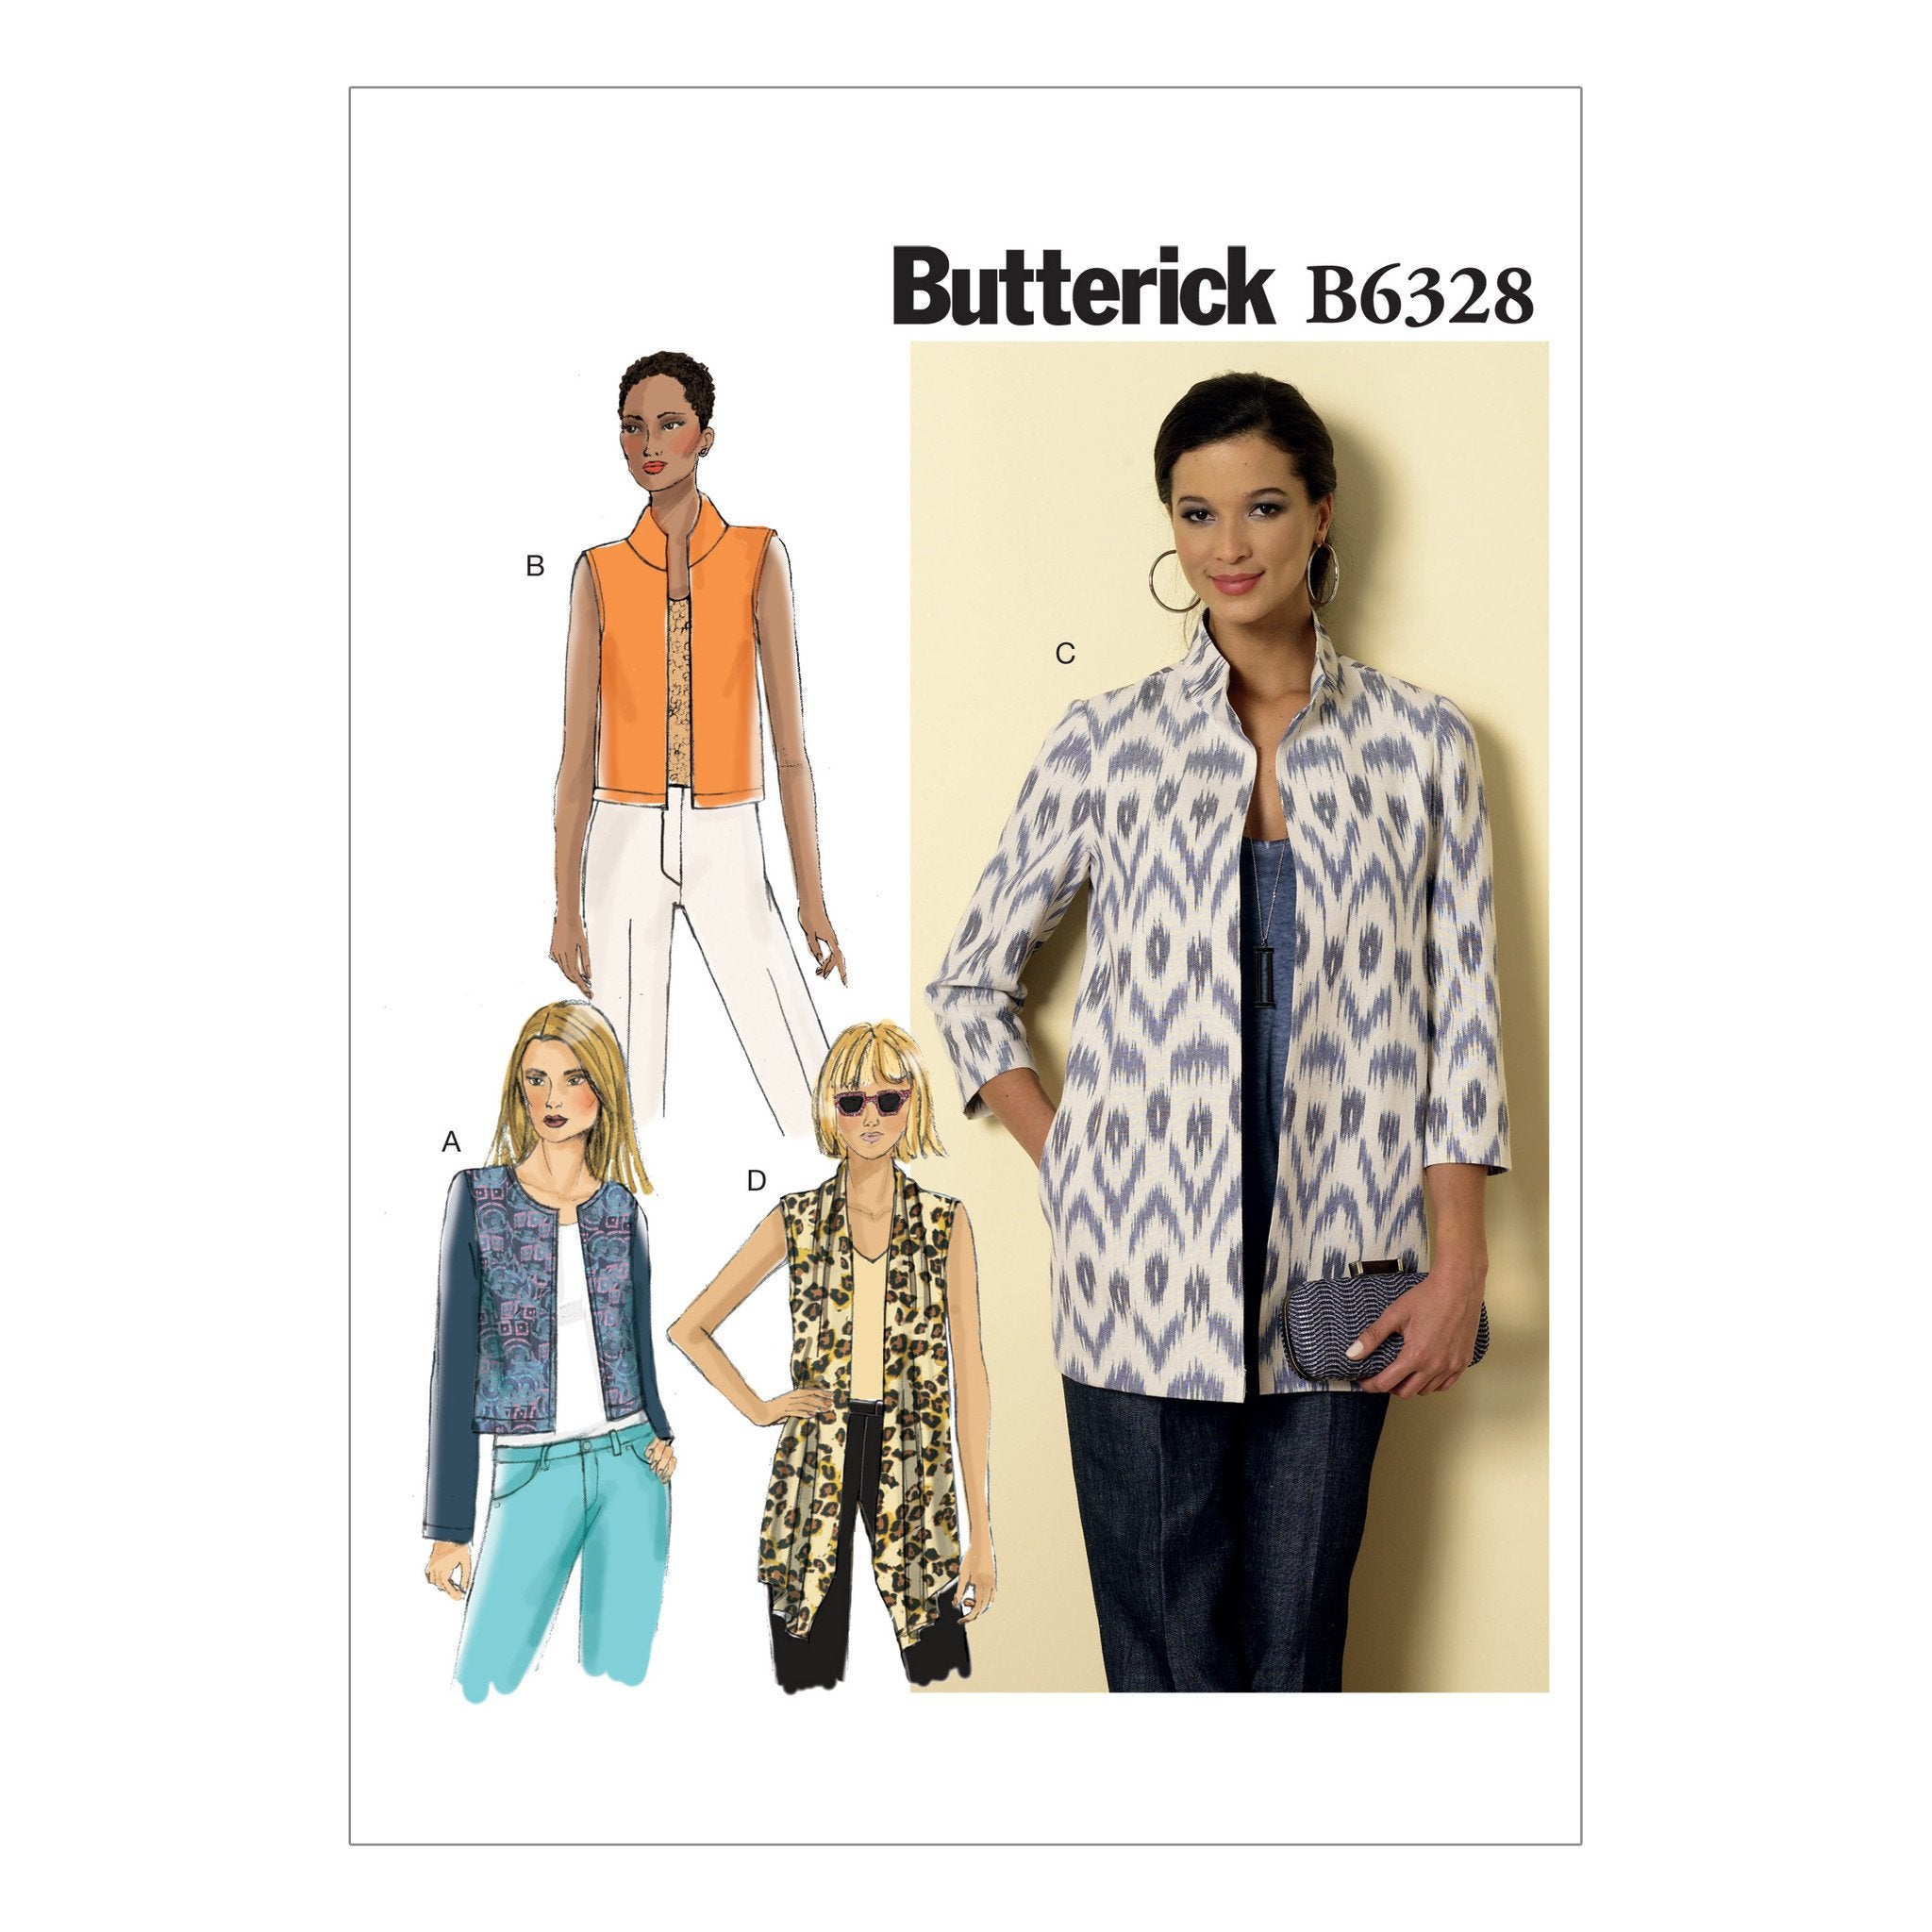 B6328 Misses' Open-Front Jackets from Jaycotts Sewing Supplies